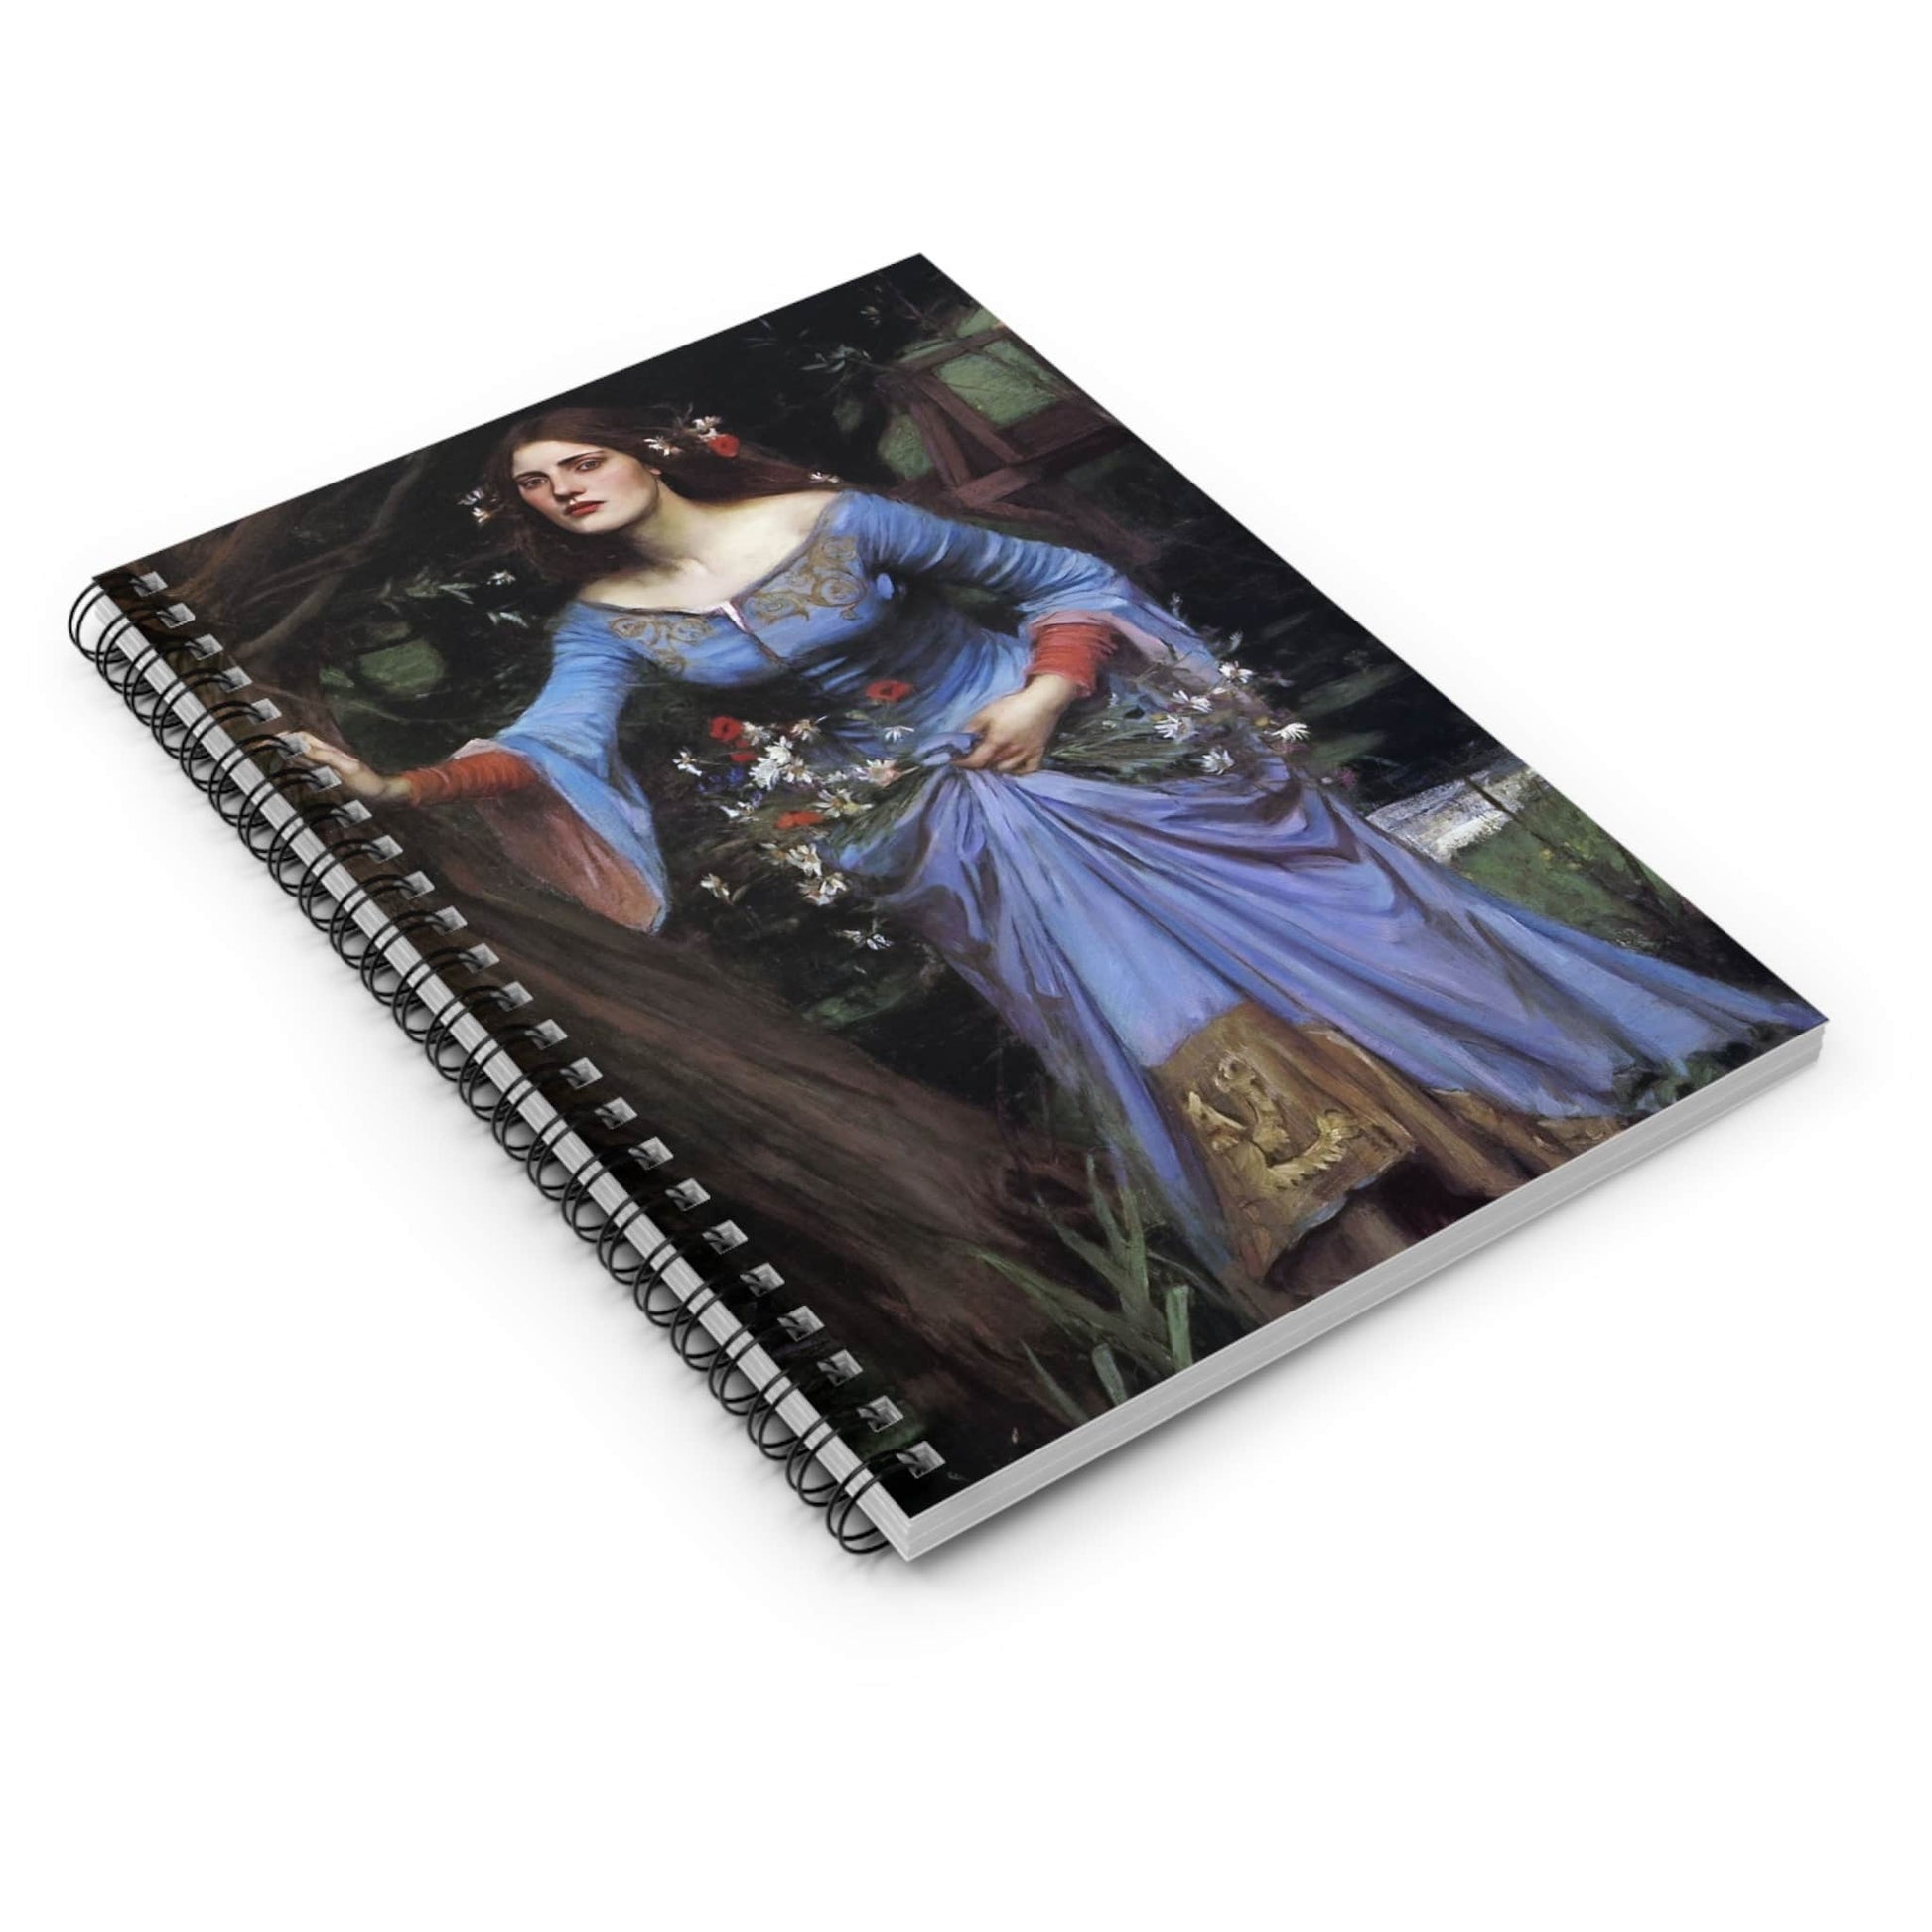 Romantic Spiral Notebook Laying Flat on White Surface